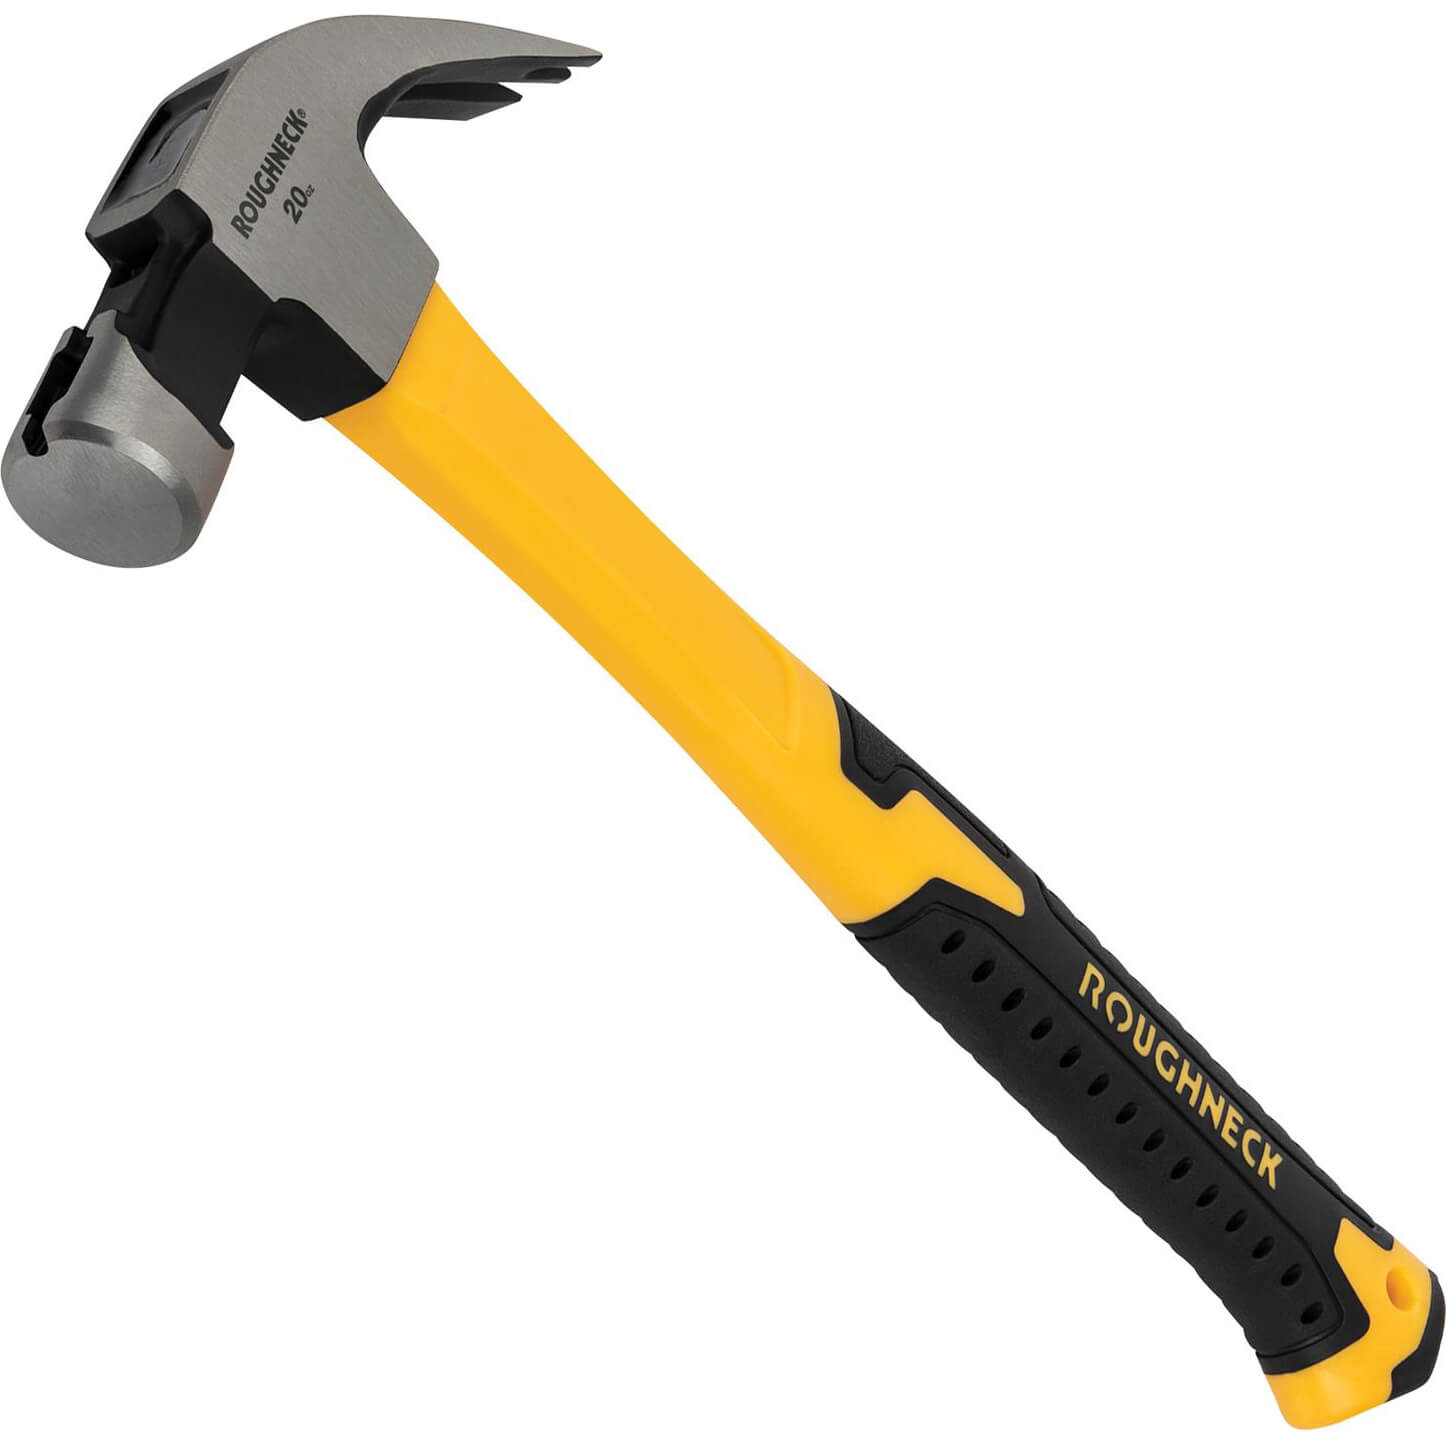 Image of Roughneck Fibreglass Shaft Curved Claw Hammer 570g